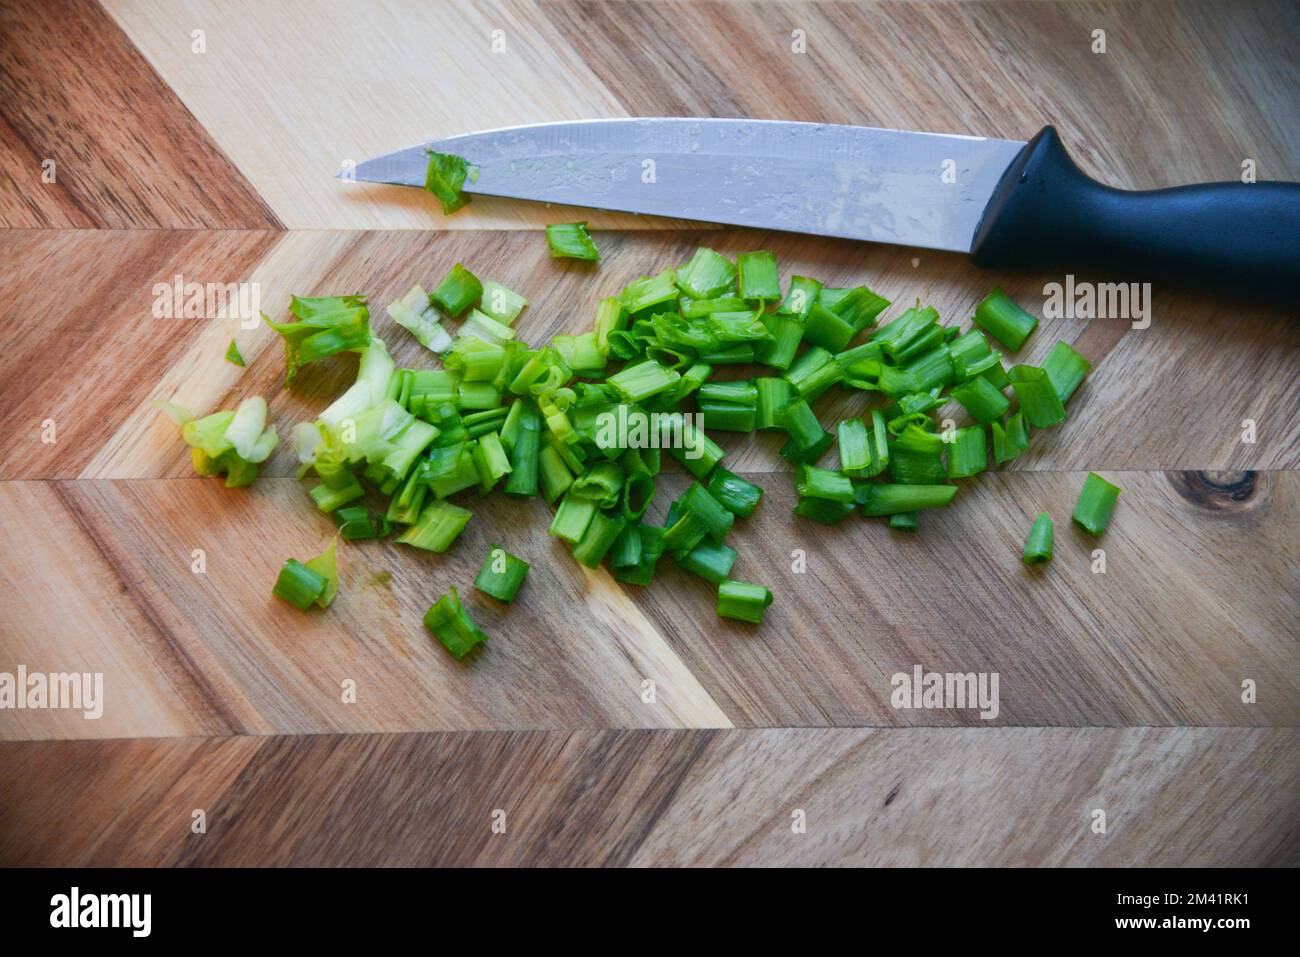 Cut Green onions chives on a cutting board. Dark wooden background. Top view. Stock Photo